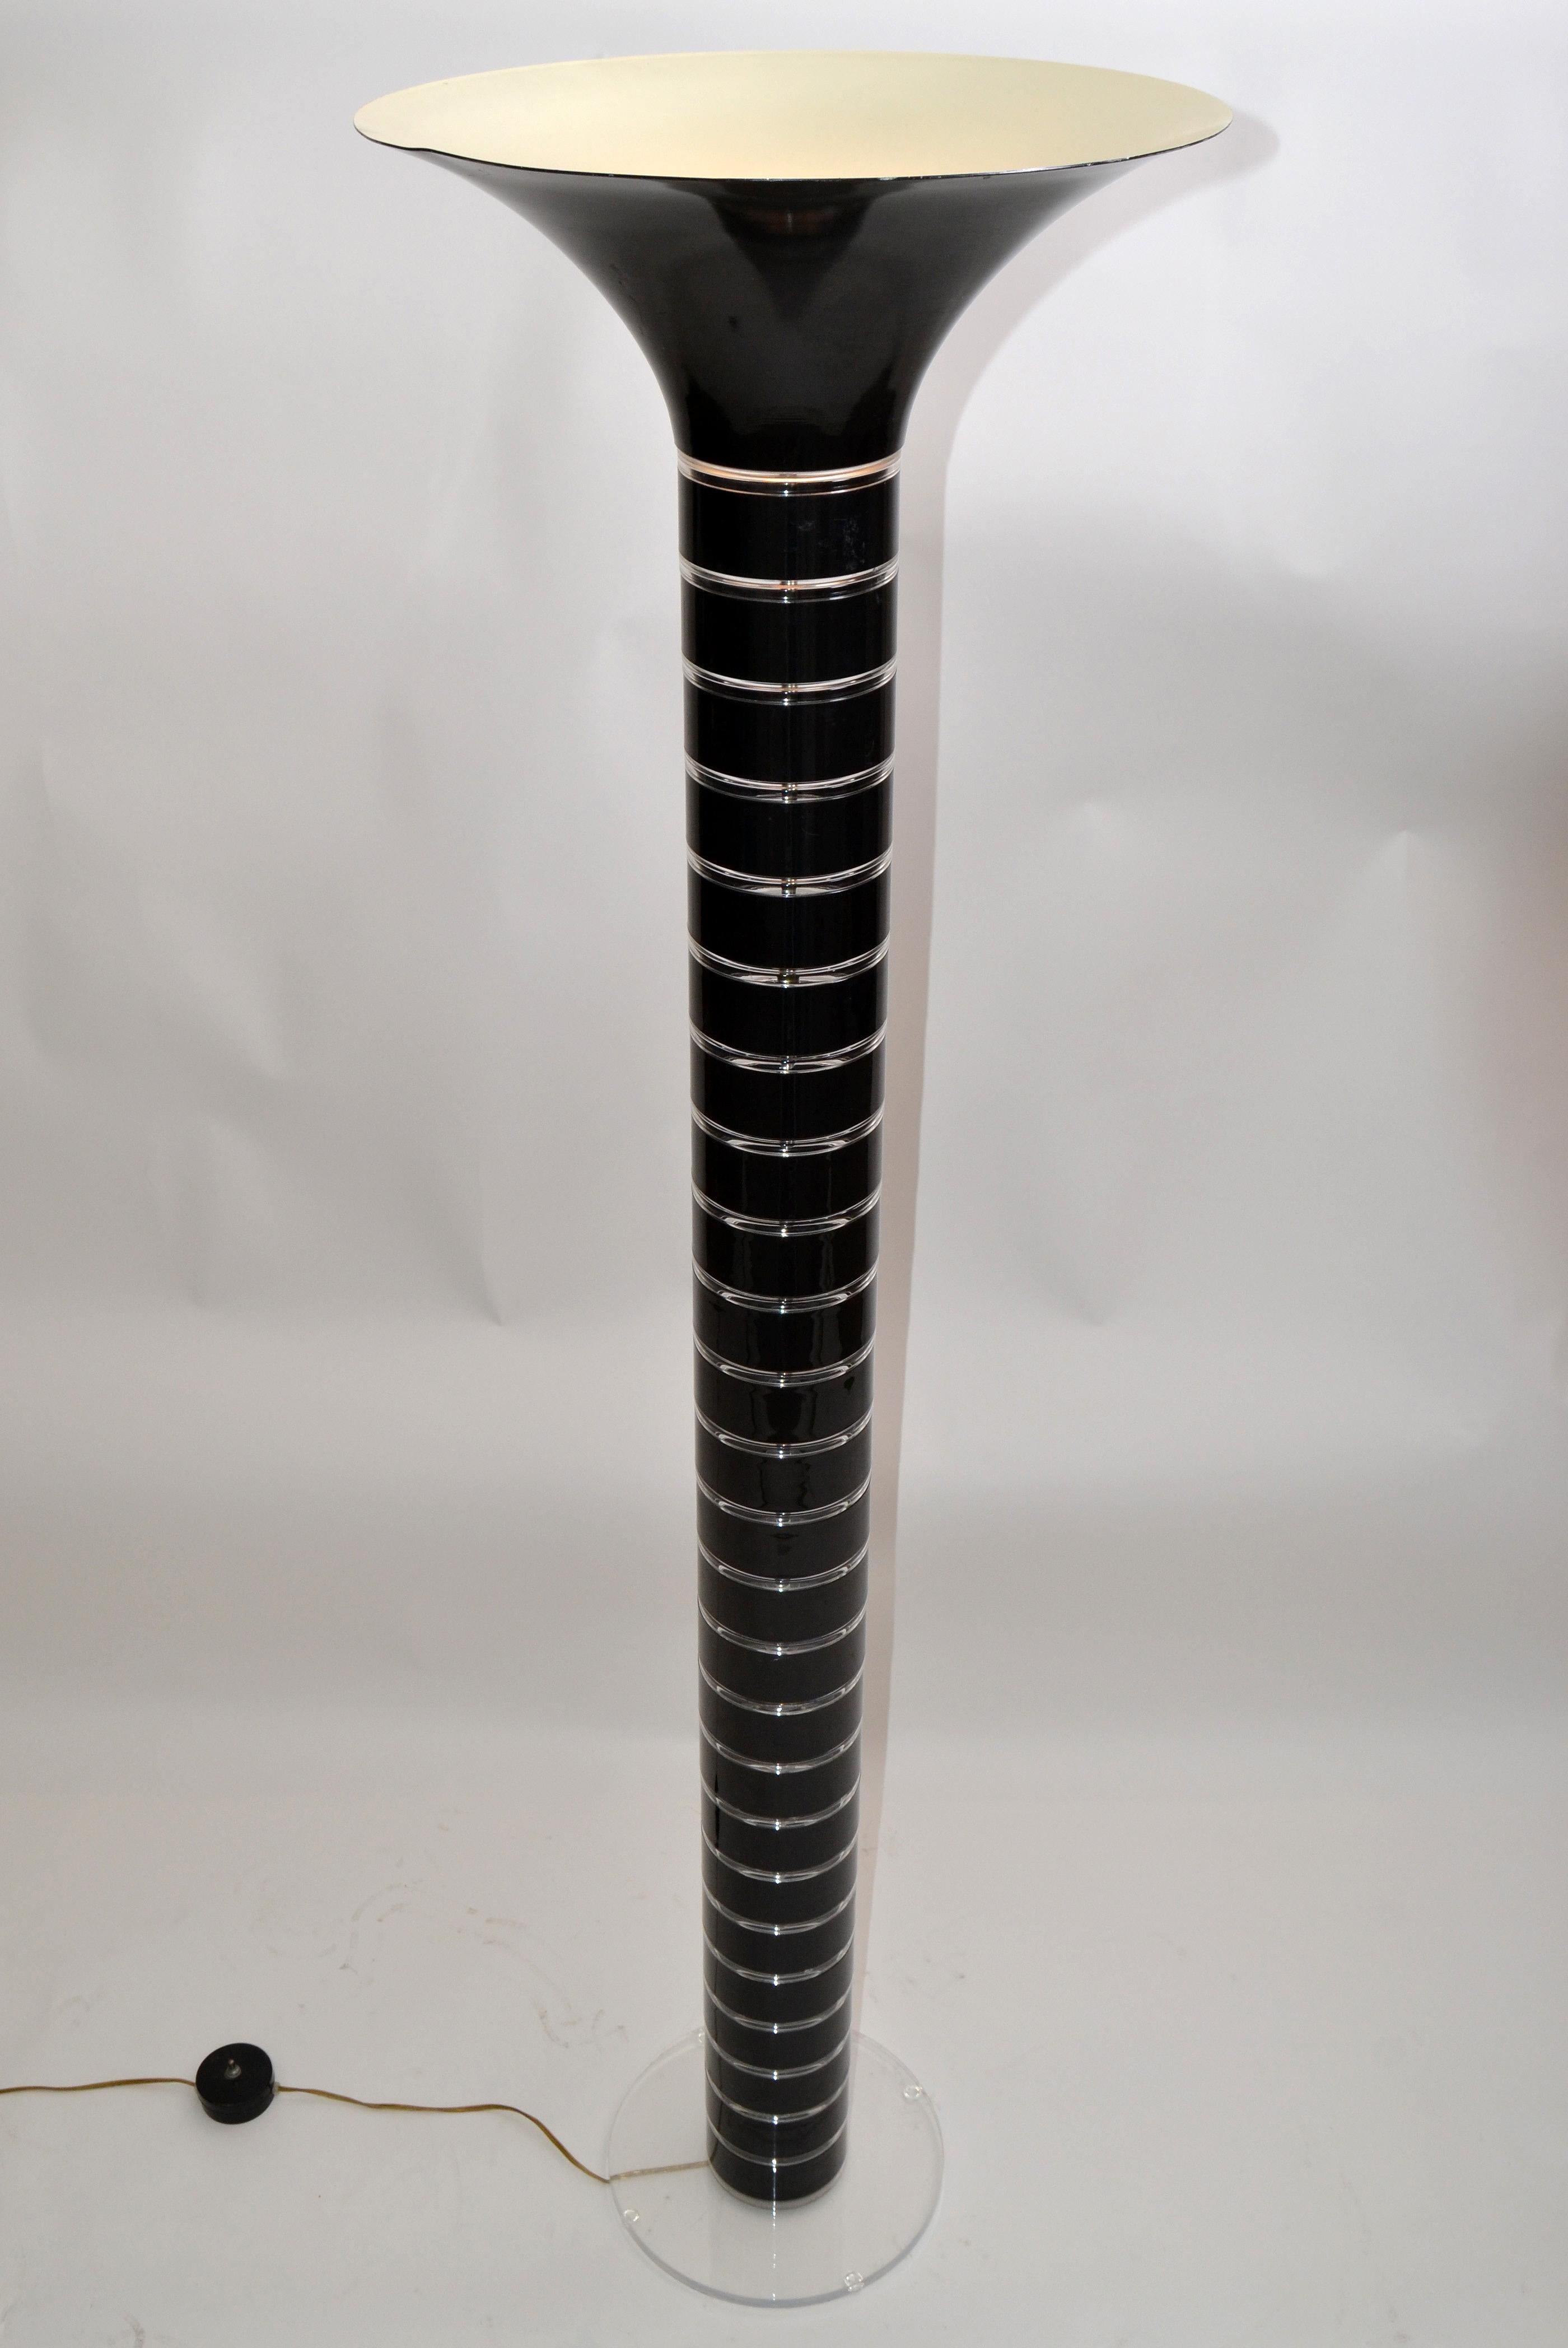 Stacked black acrylic segments separated by transparent Lucite rings tall floor lamp.
The top cone shade part is made of metal and painted in black and white enamel.
The clear base of the Floor Lamp is 12 inches in diameter.
Perfect working